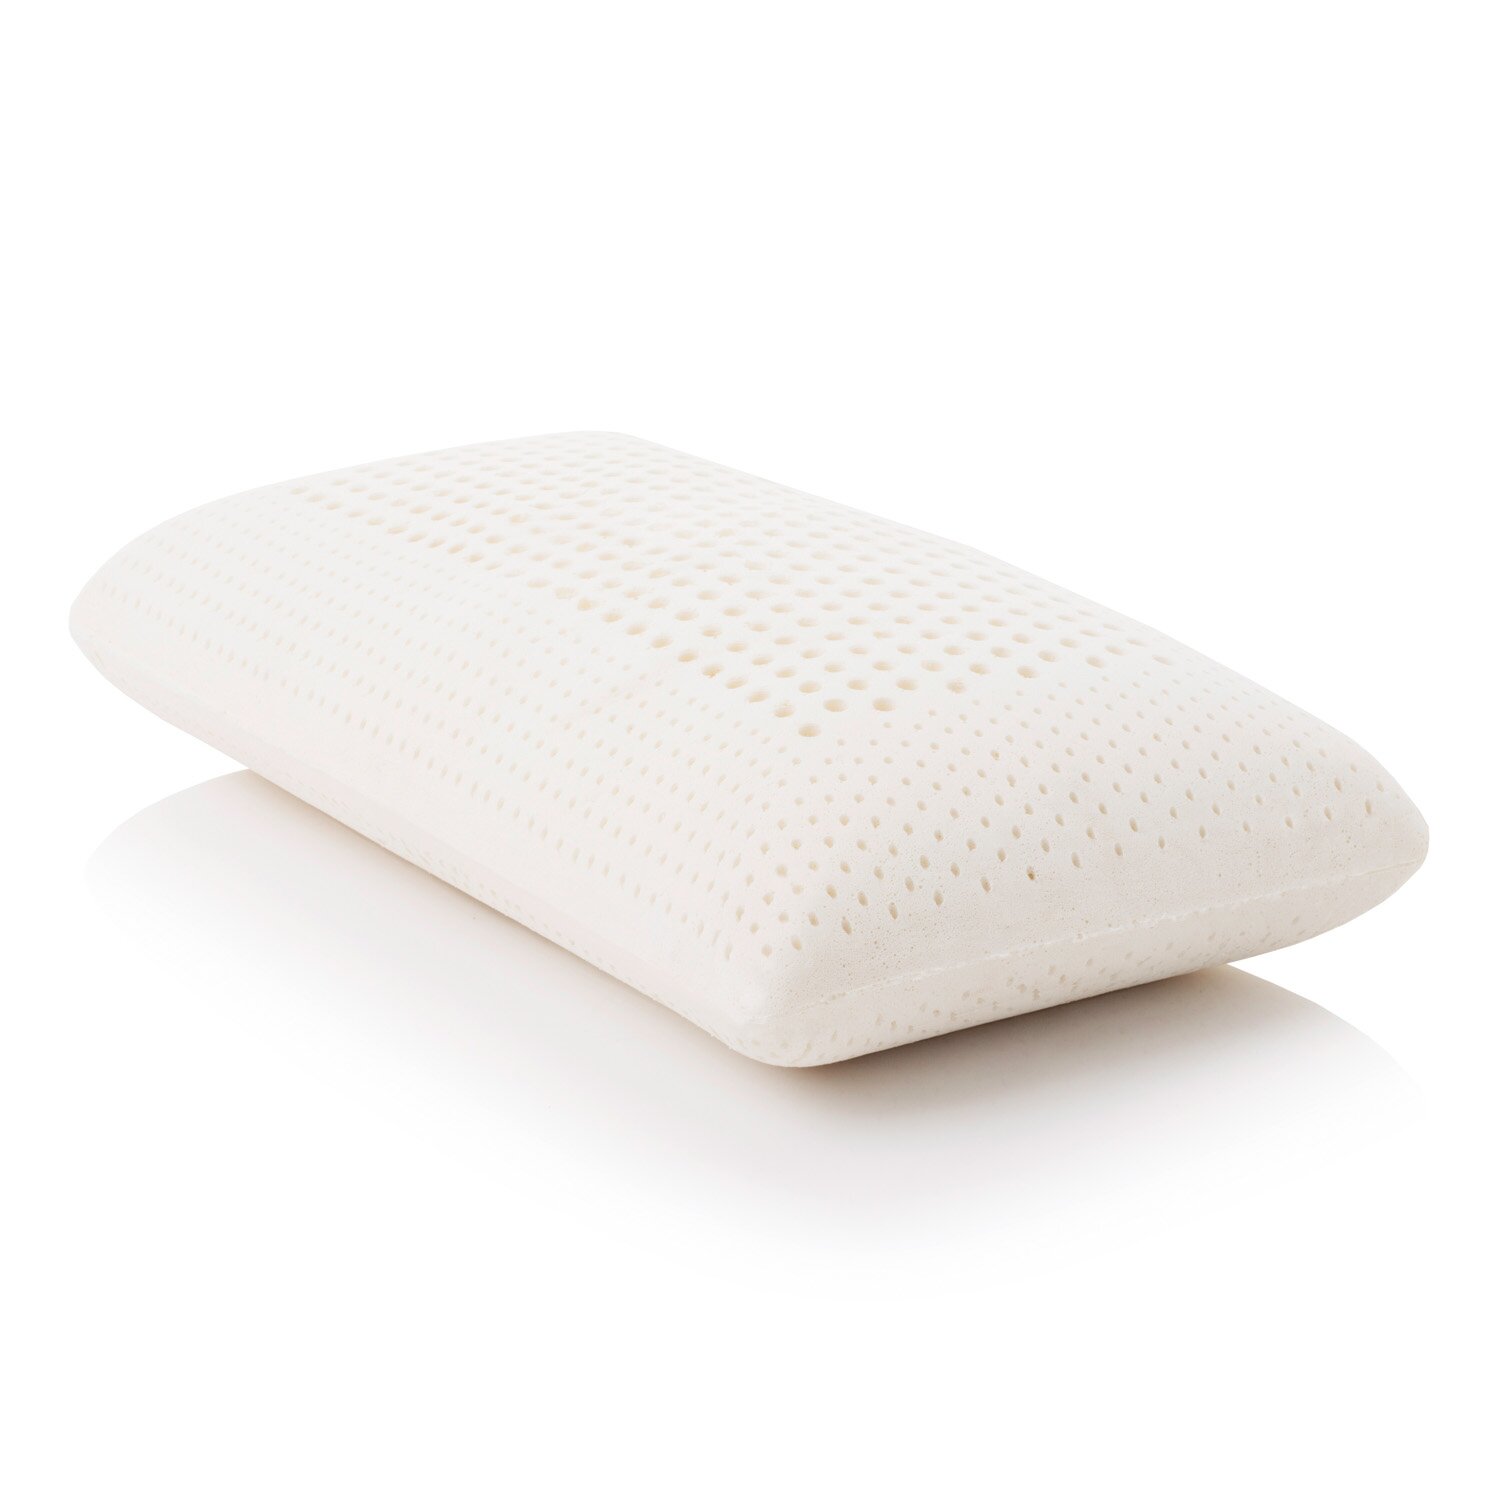 Zoned Talalay Latex Pillow ZZQQHPLX